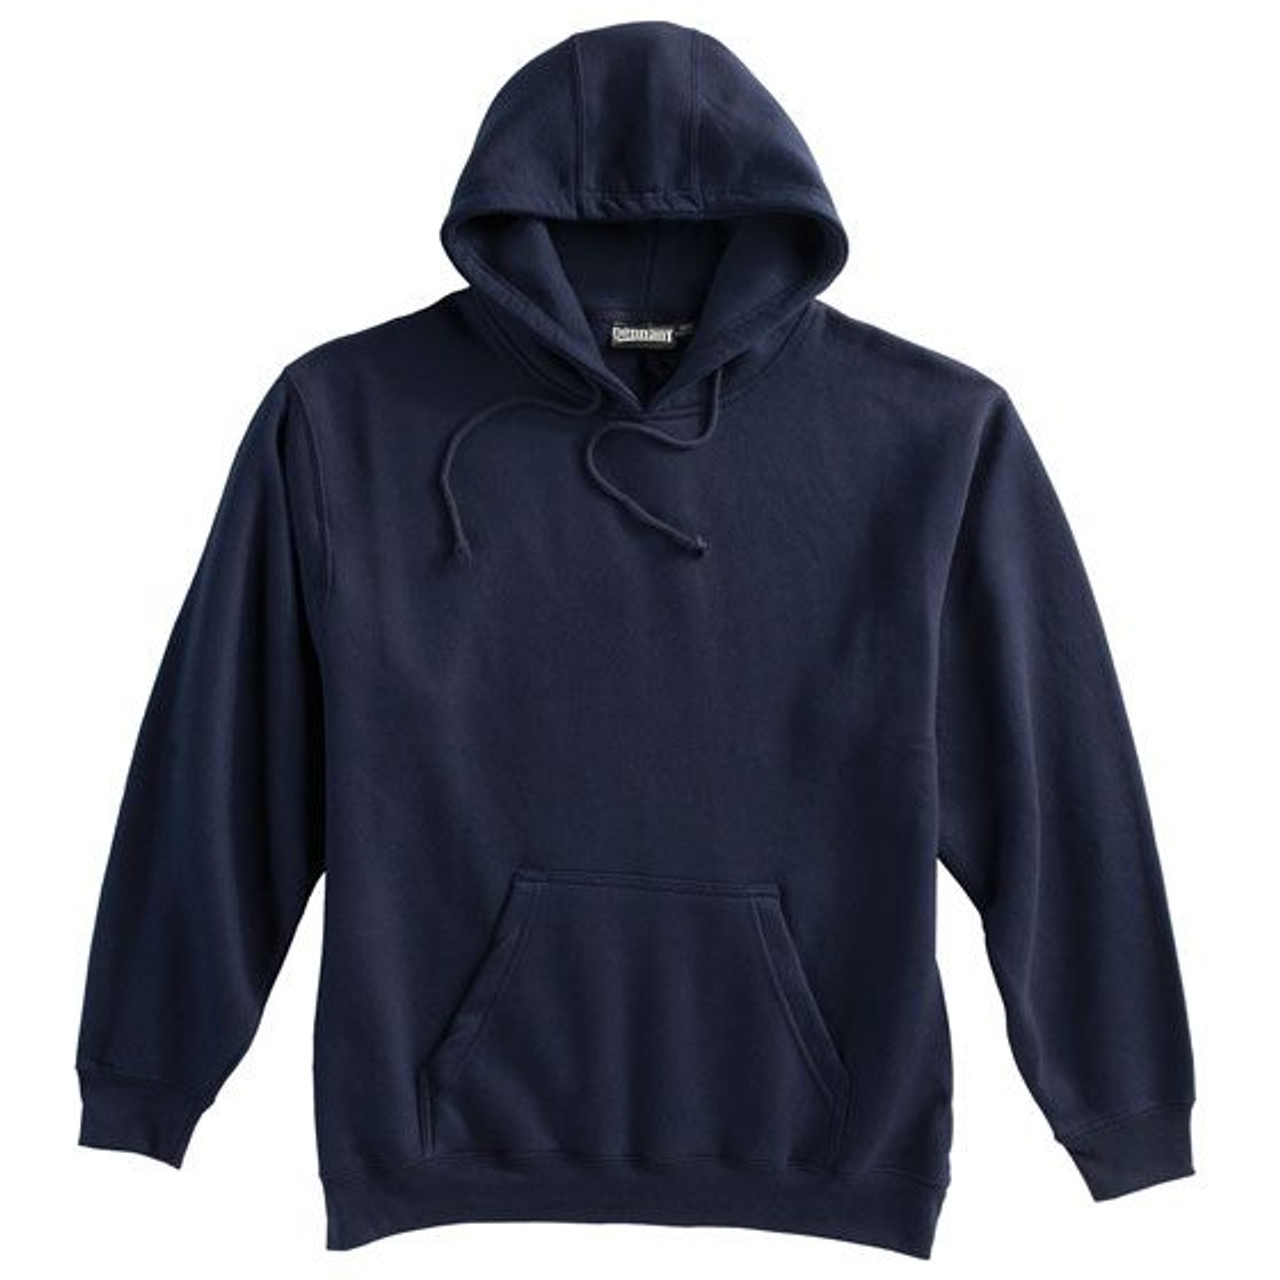 Pennant Super 10 Pullover Hoodie | East Coast Emergency Outfitter